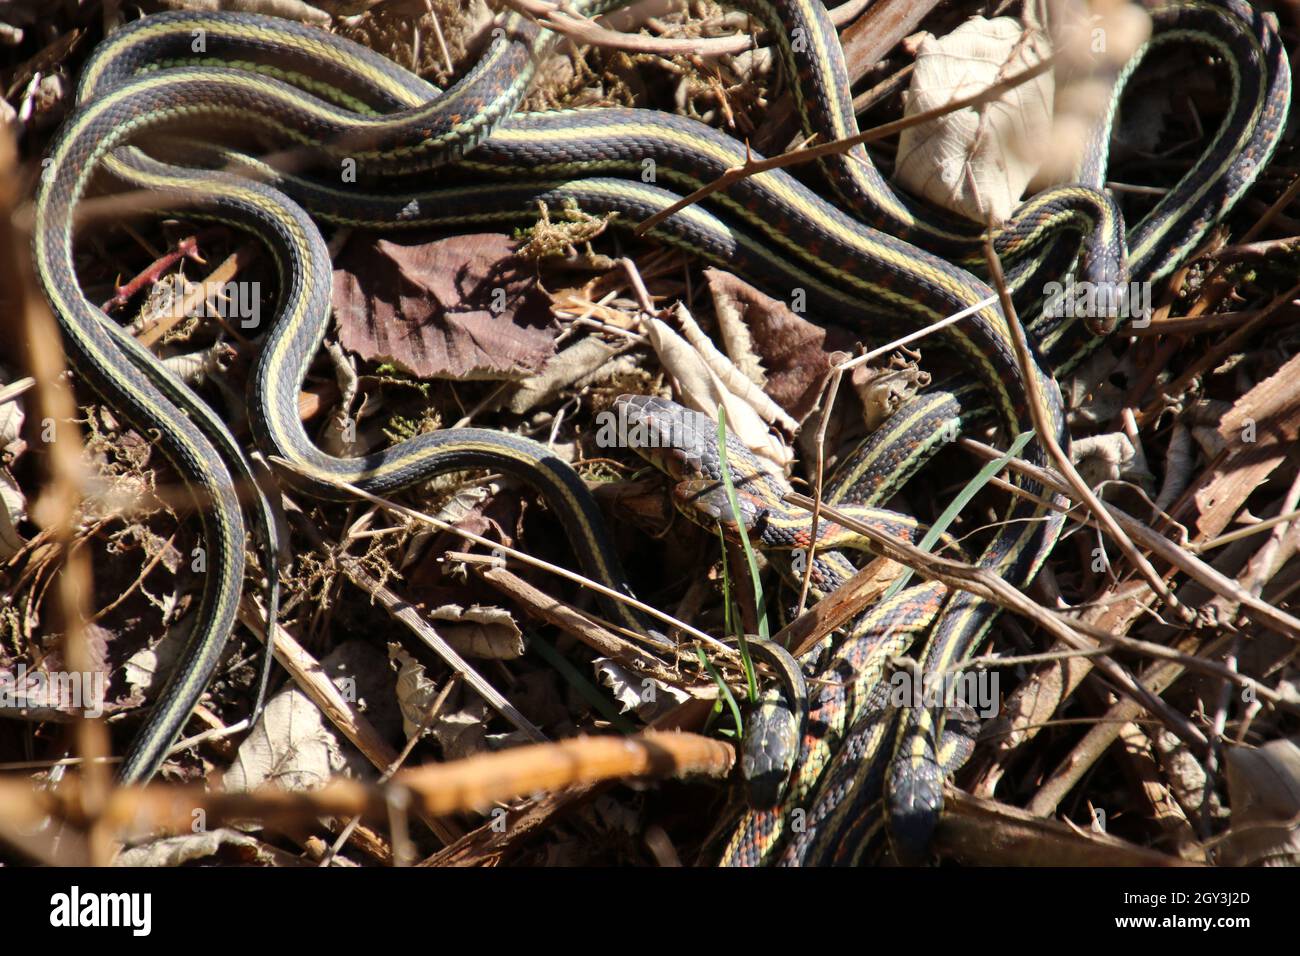 A number of garter snakes intertwined  on some dead grass and leaves Stock Photo